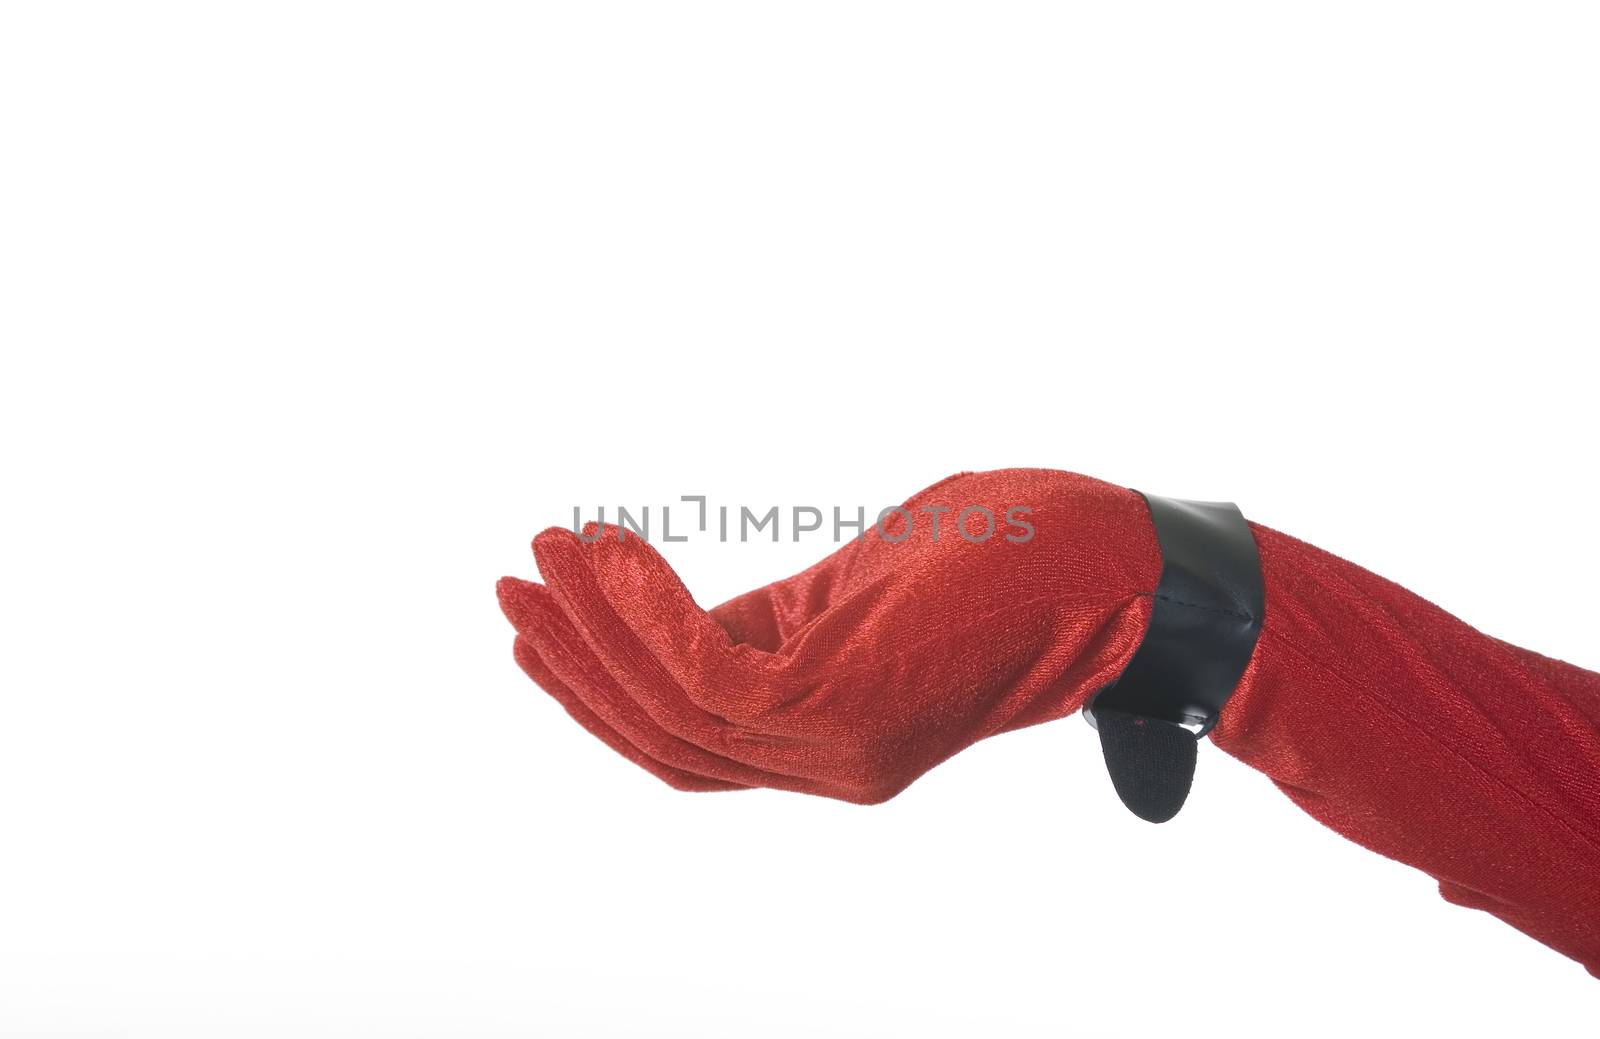 Red velvet glove with black buckle at wrist.  Graceful, feminine, hand ready to hold your product.  Christmas theme with room for copy on white background.